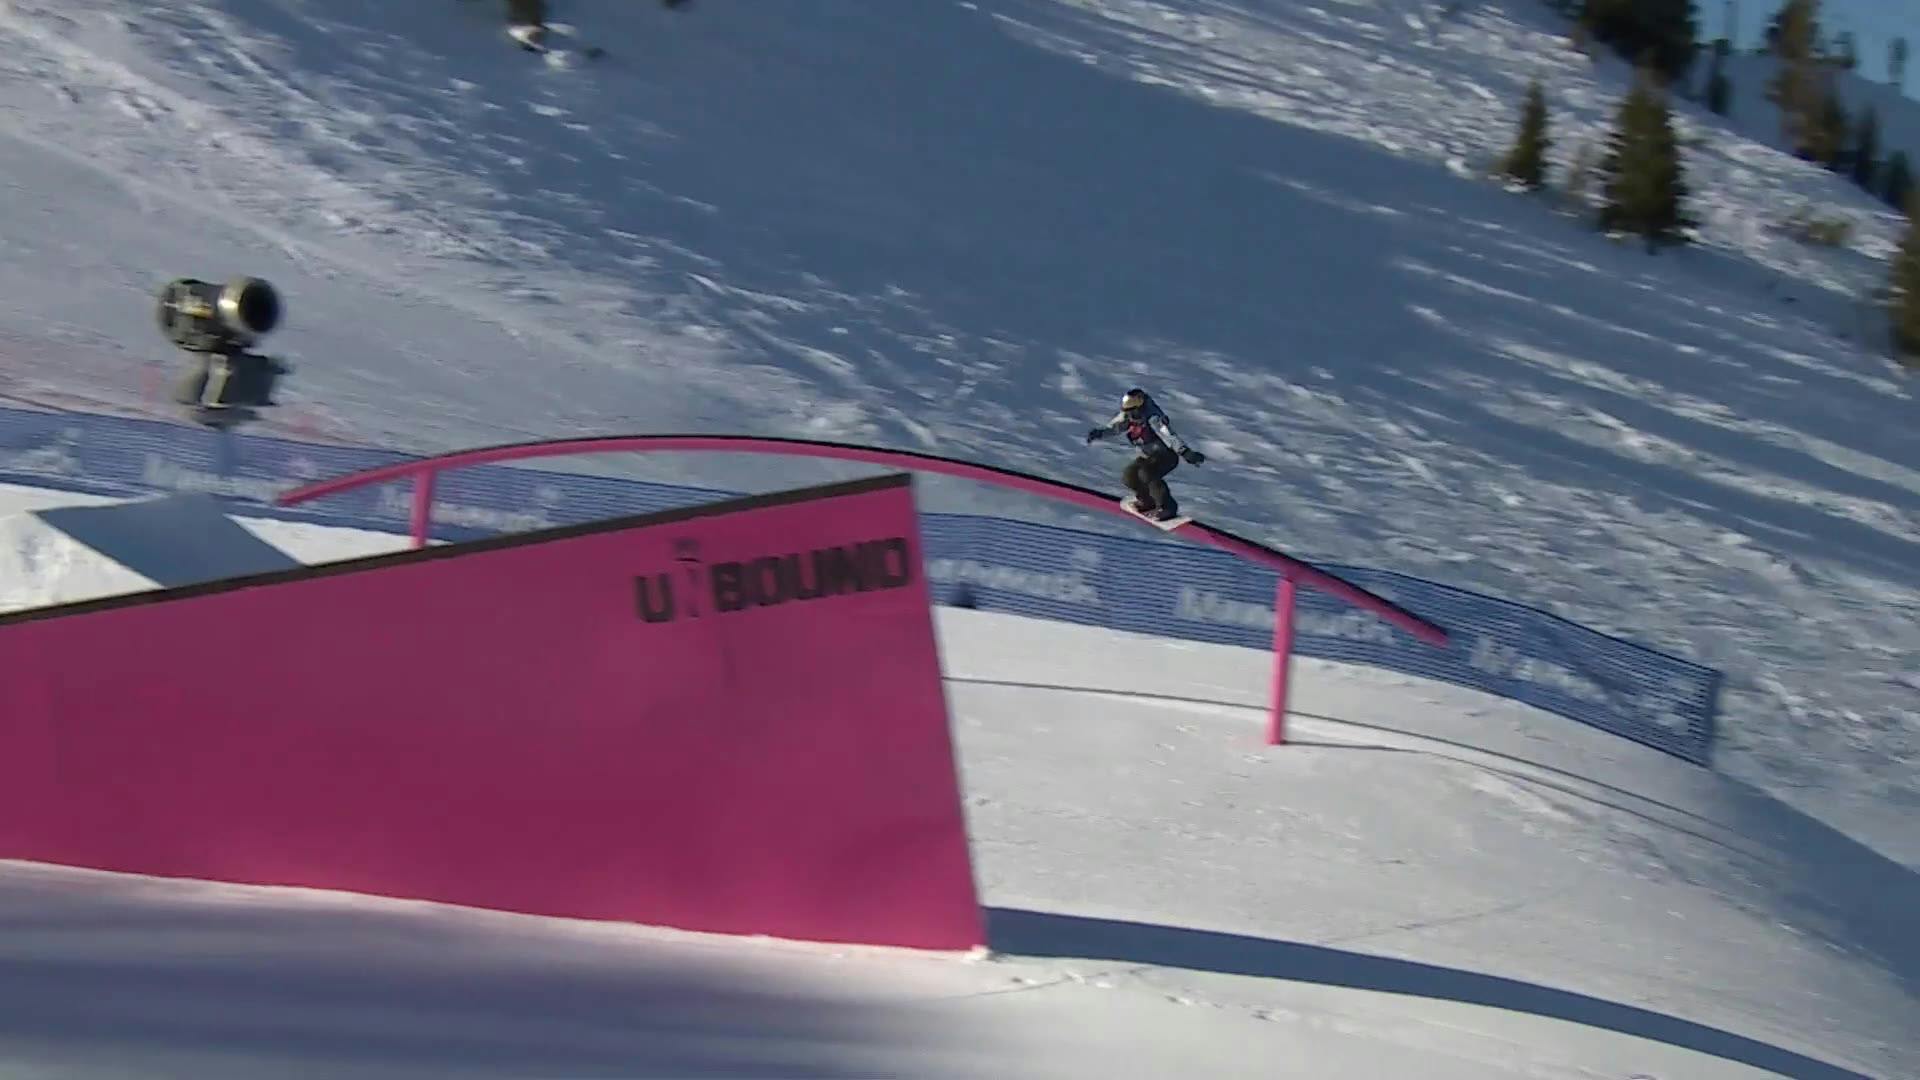 Toyota U.S. Grand Prix Mammoth Mountain Women's Snowboard Slopestyle Qualifiers | USSS Event Replays